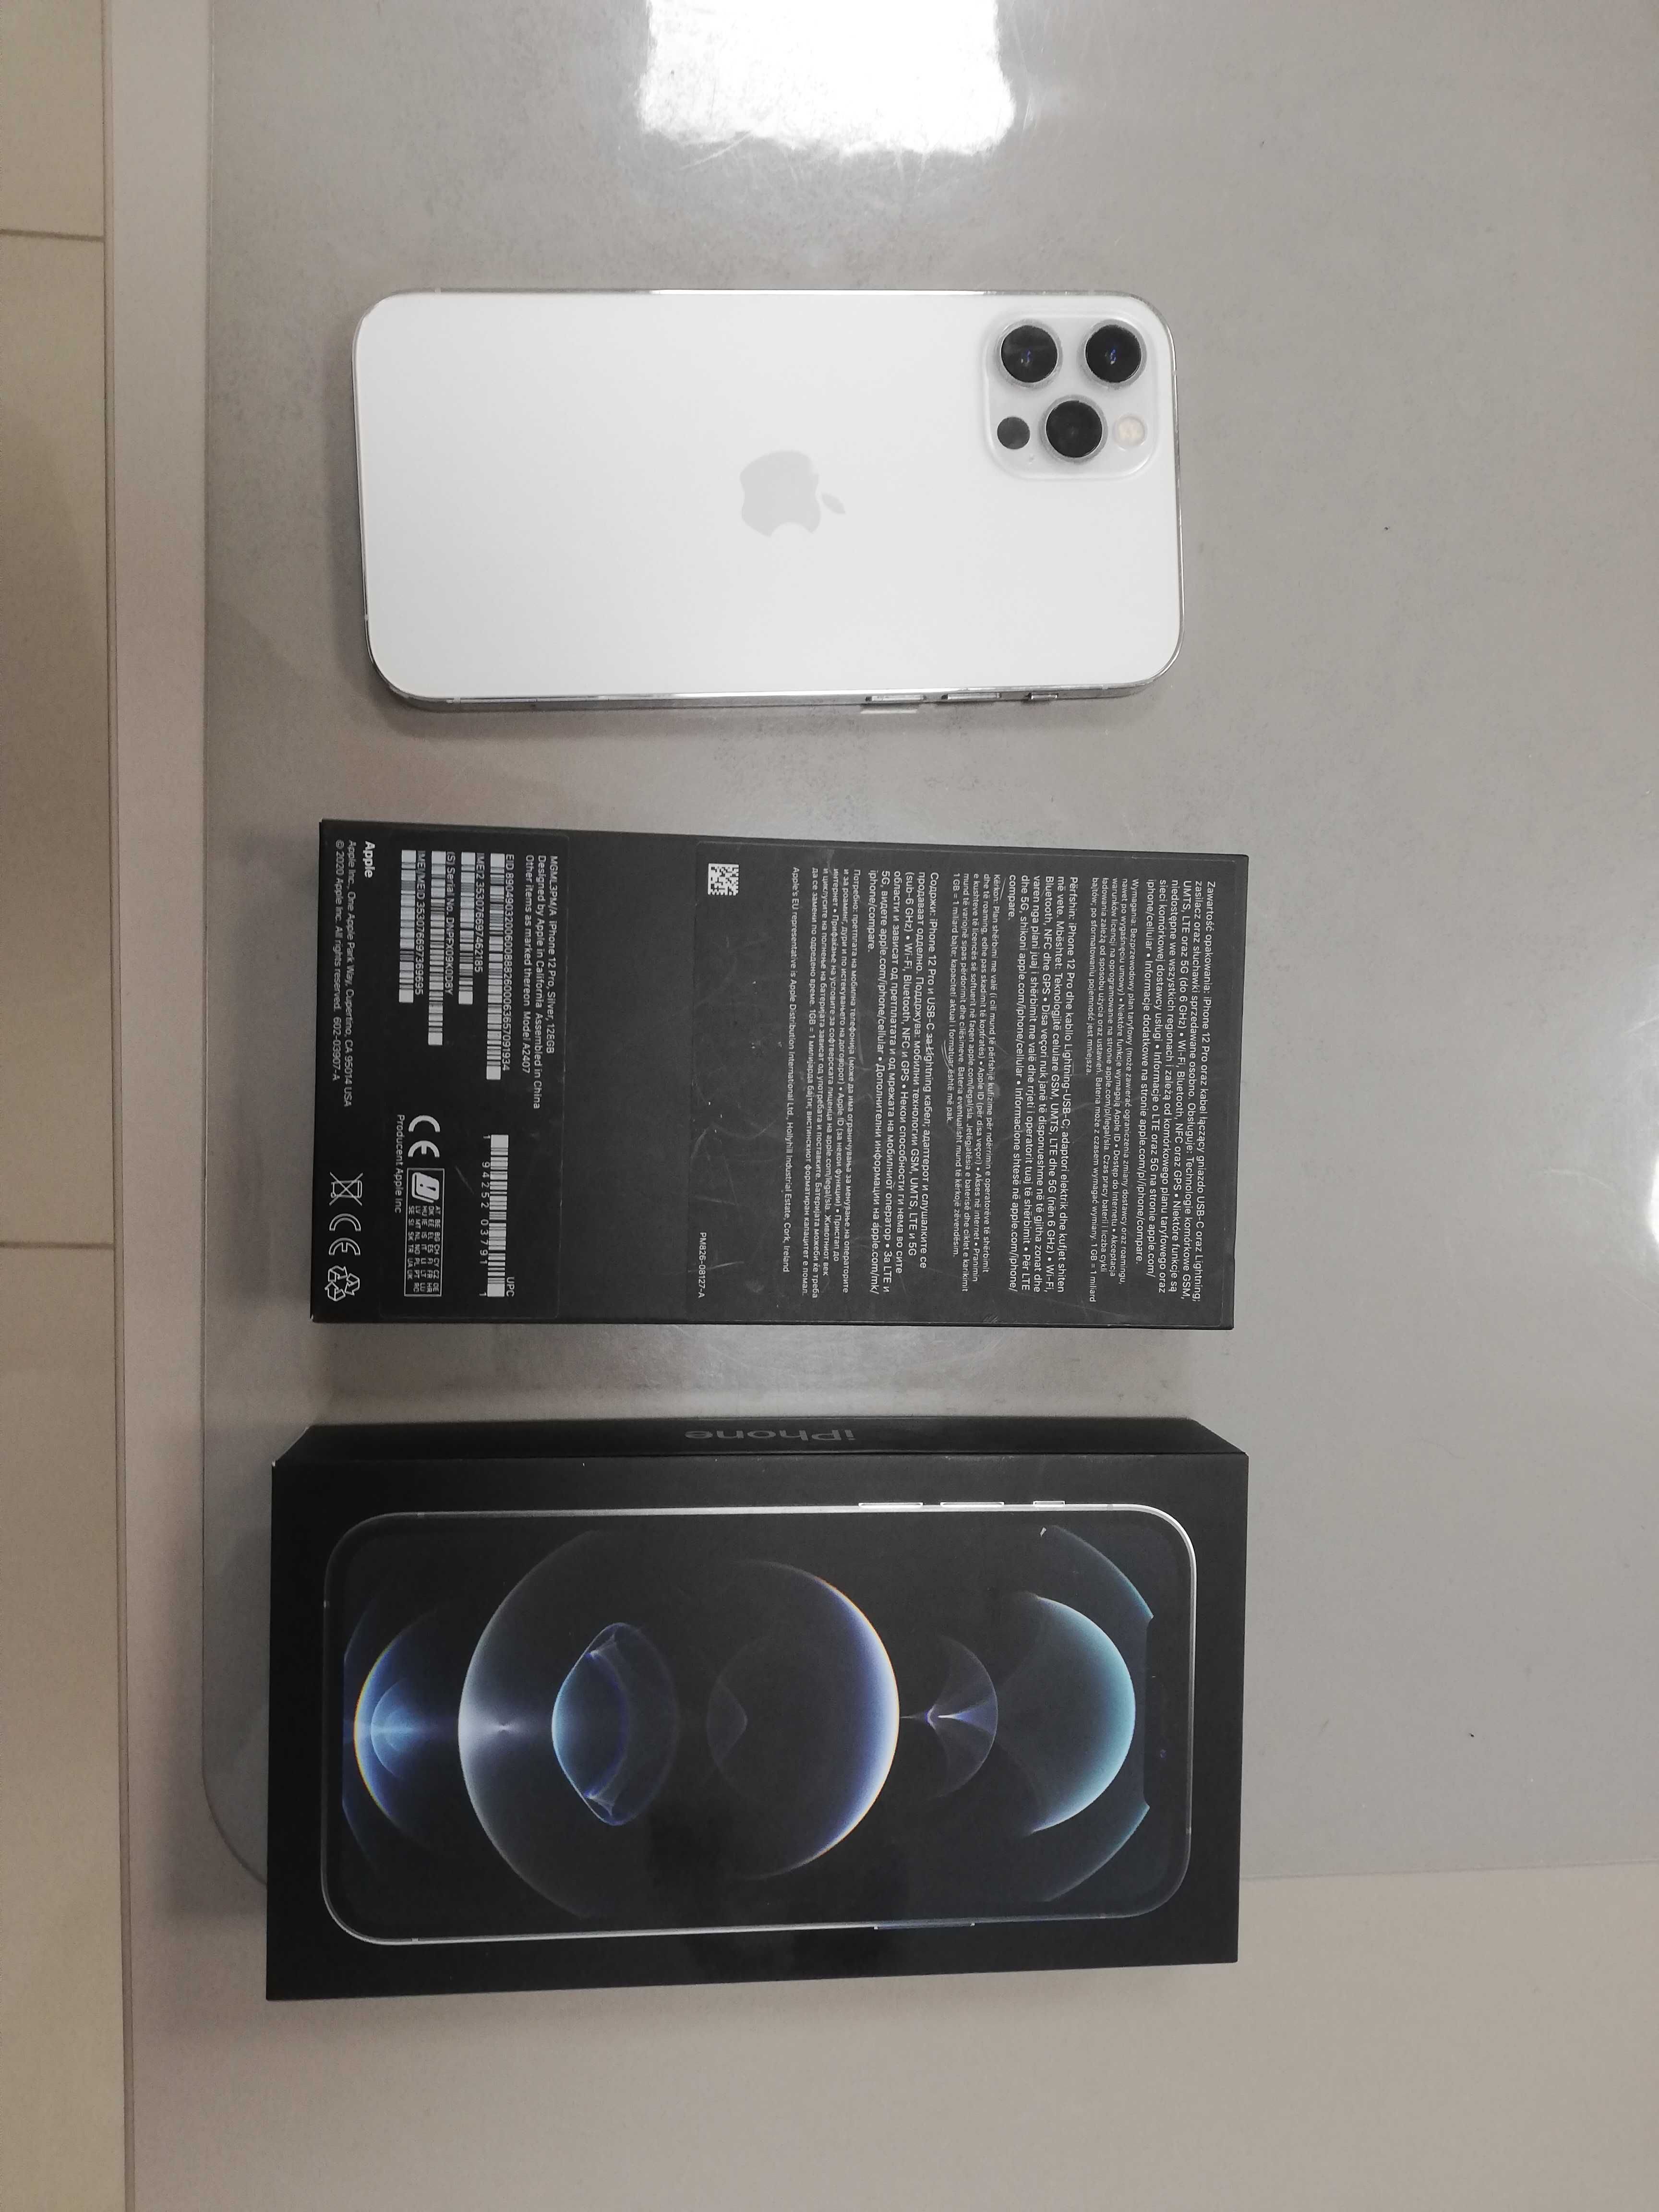 iPhone 12 Pro Silver